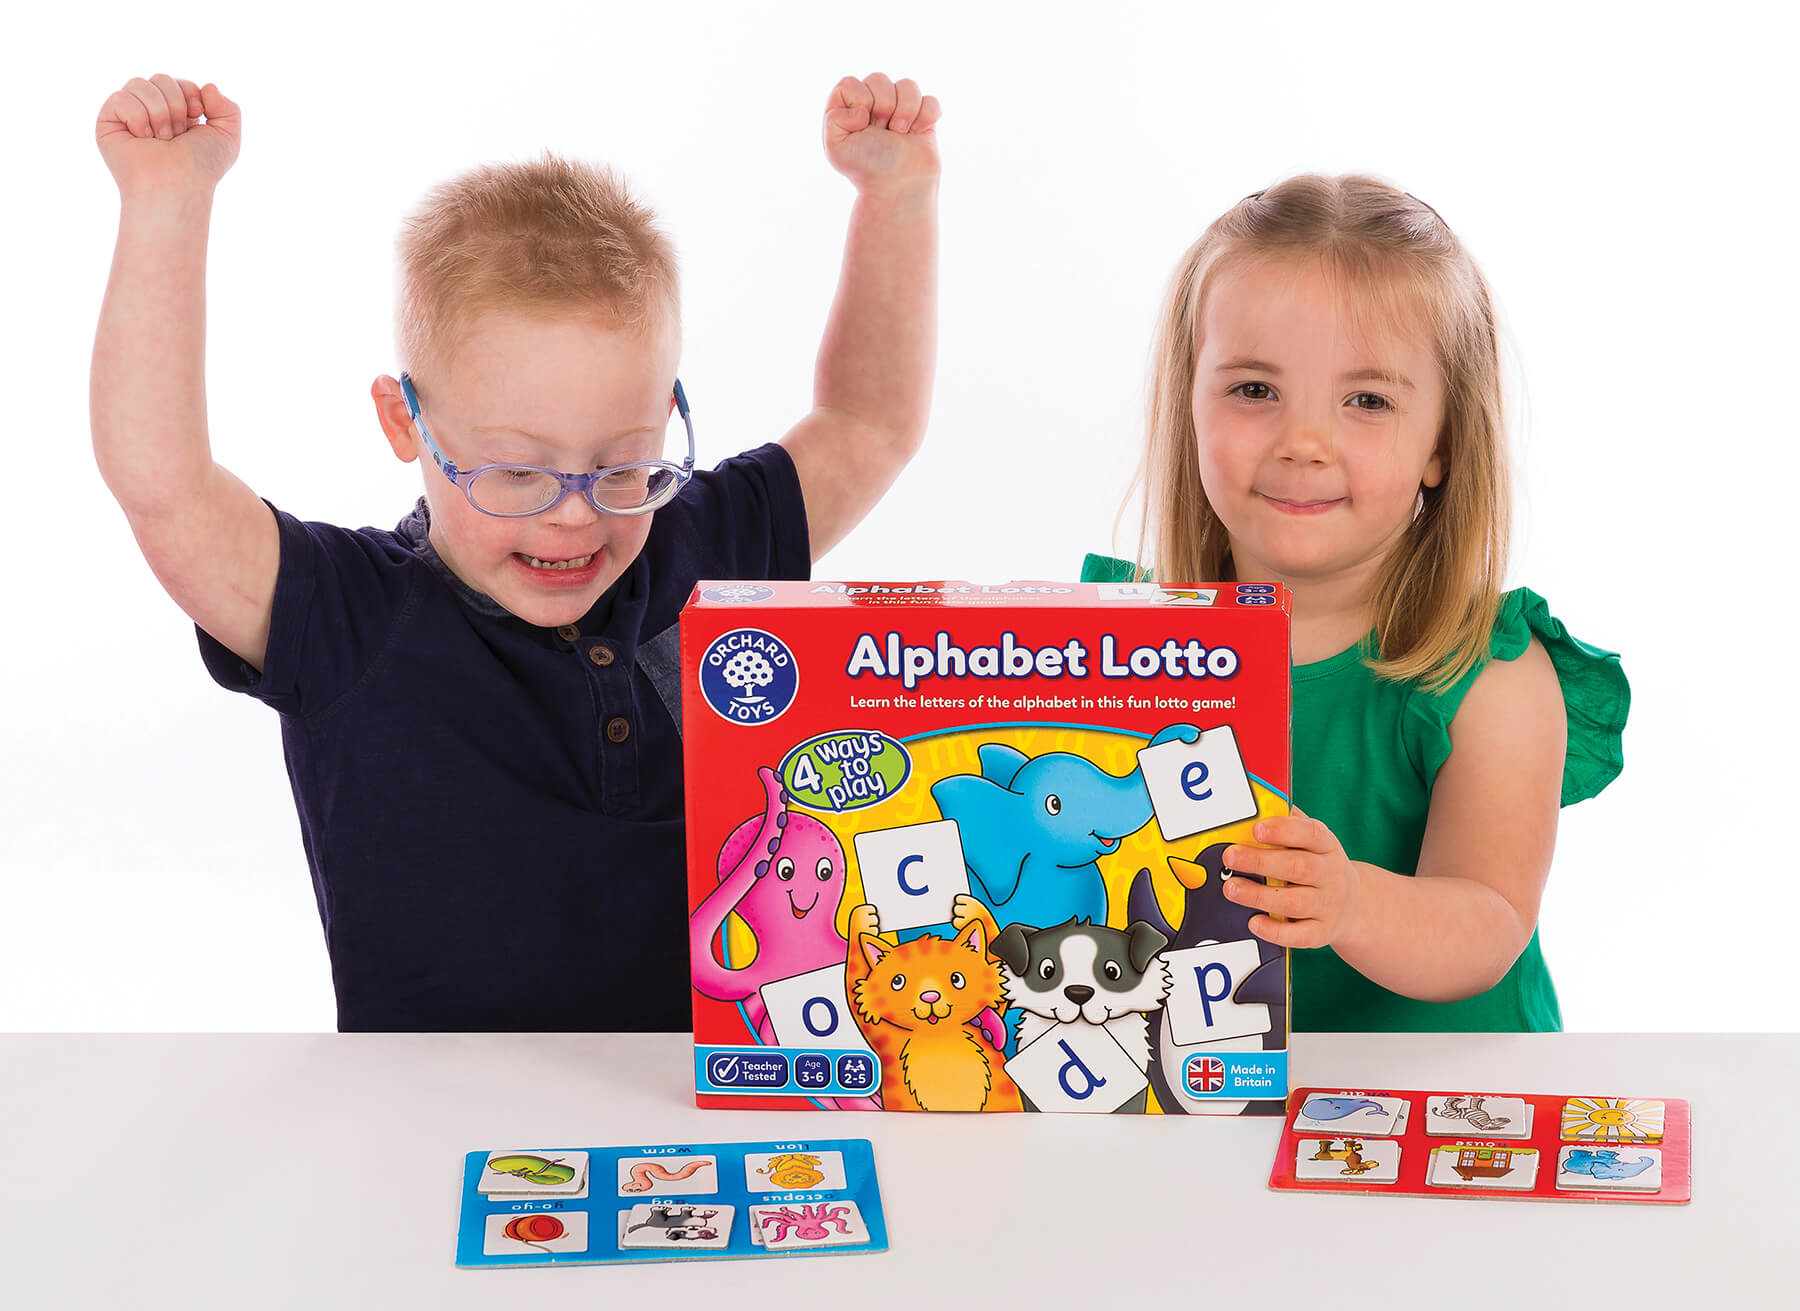 Children playing with alphabet lotto